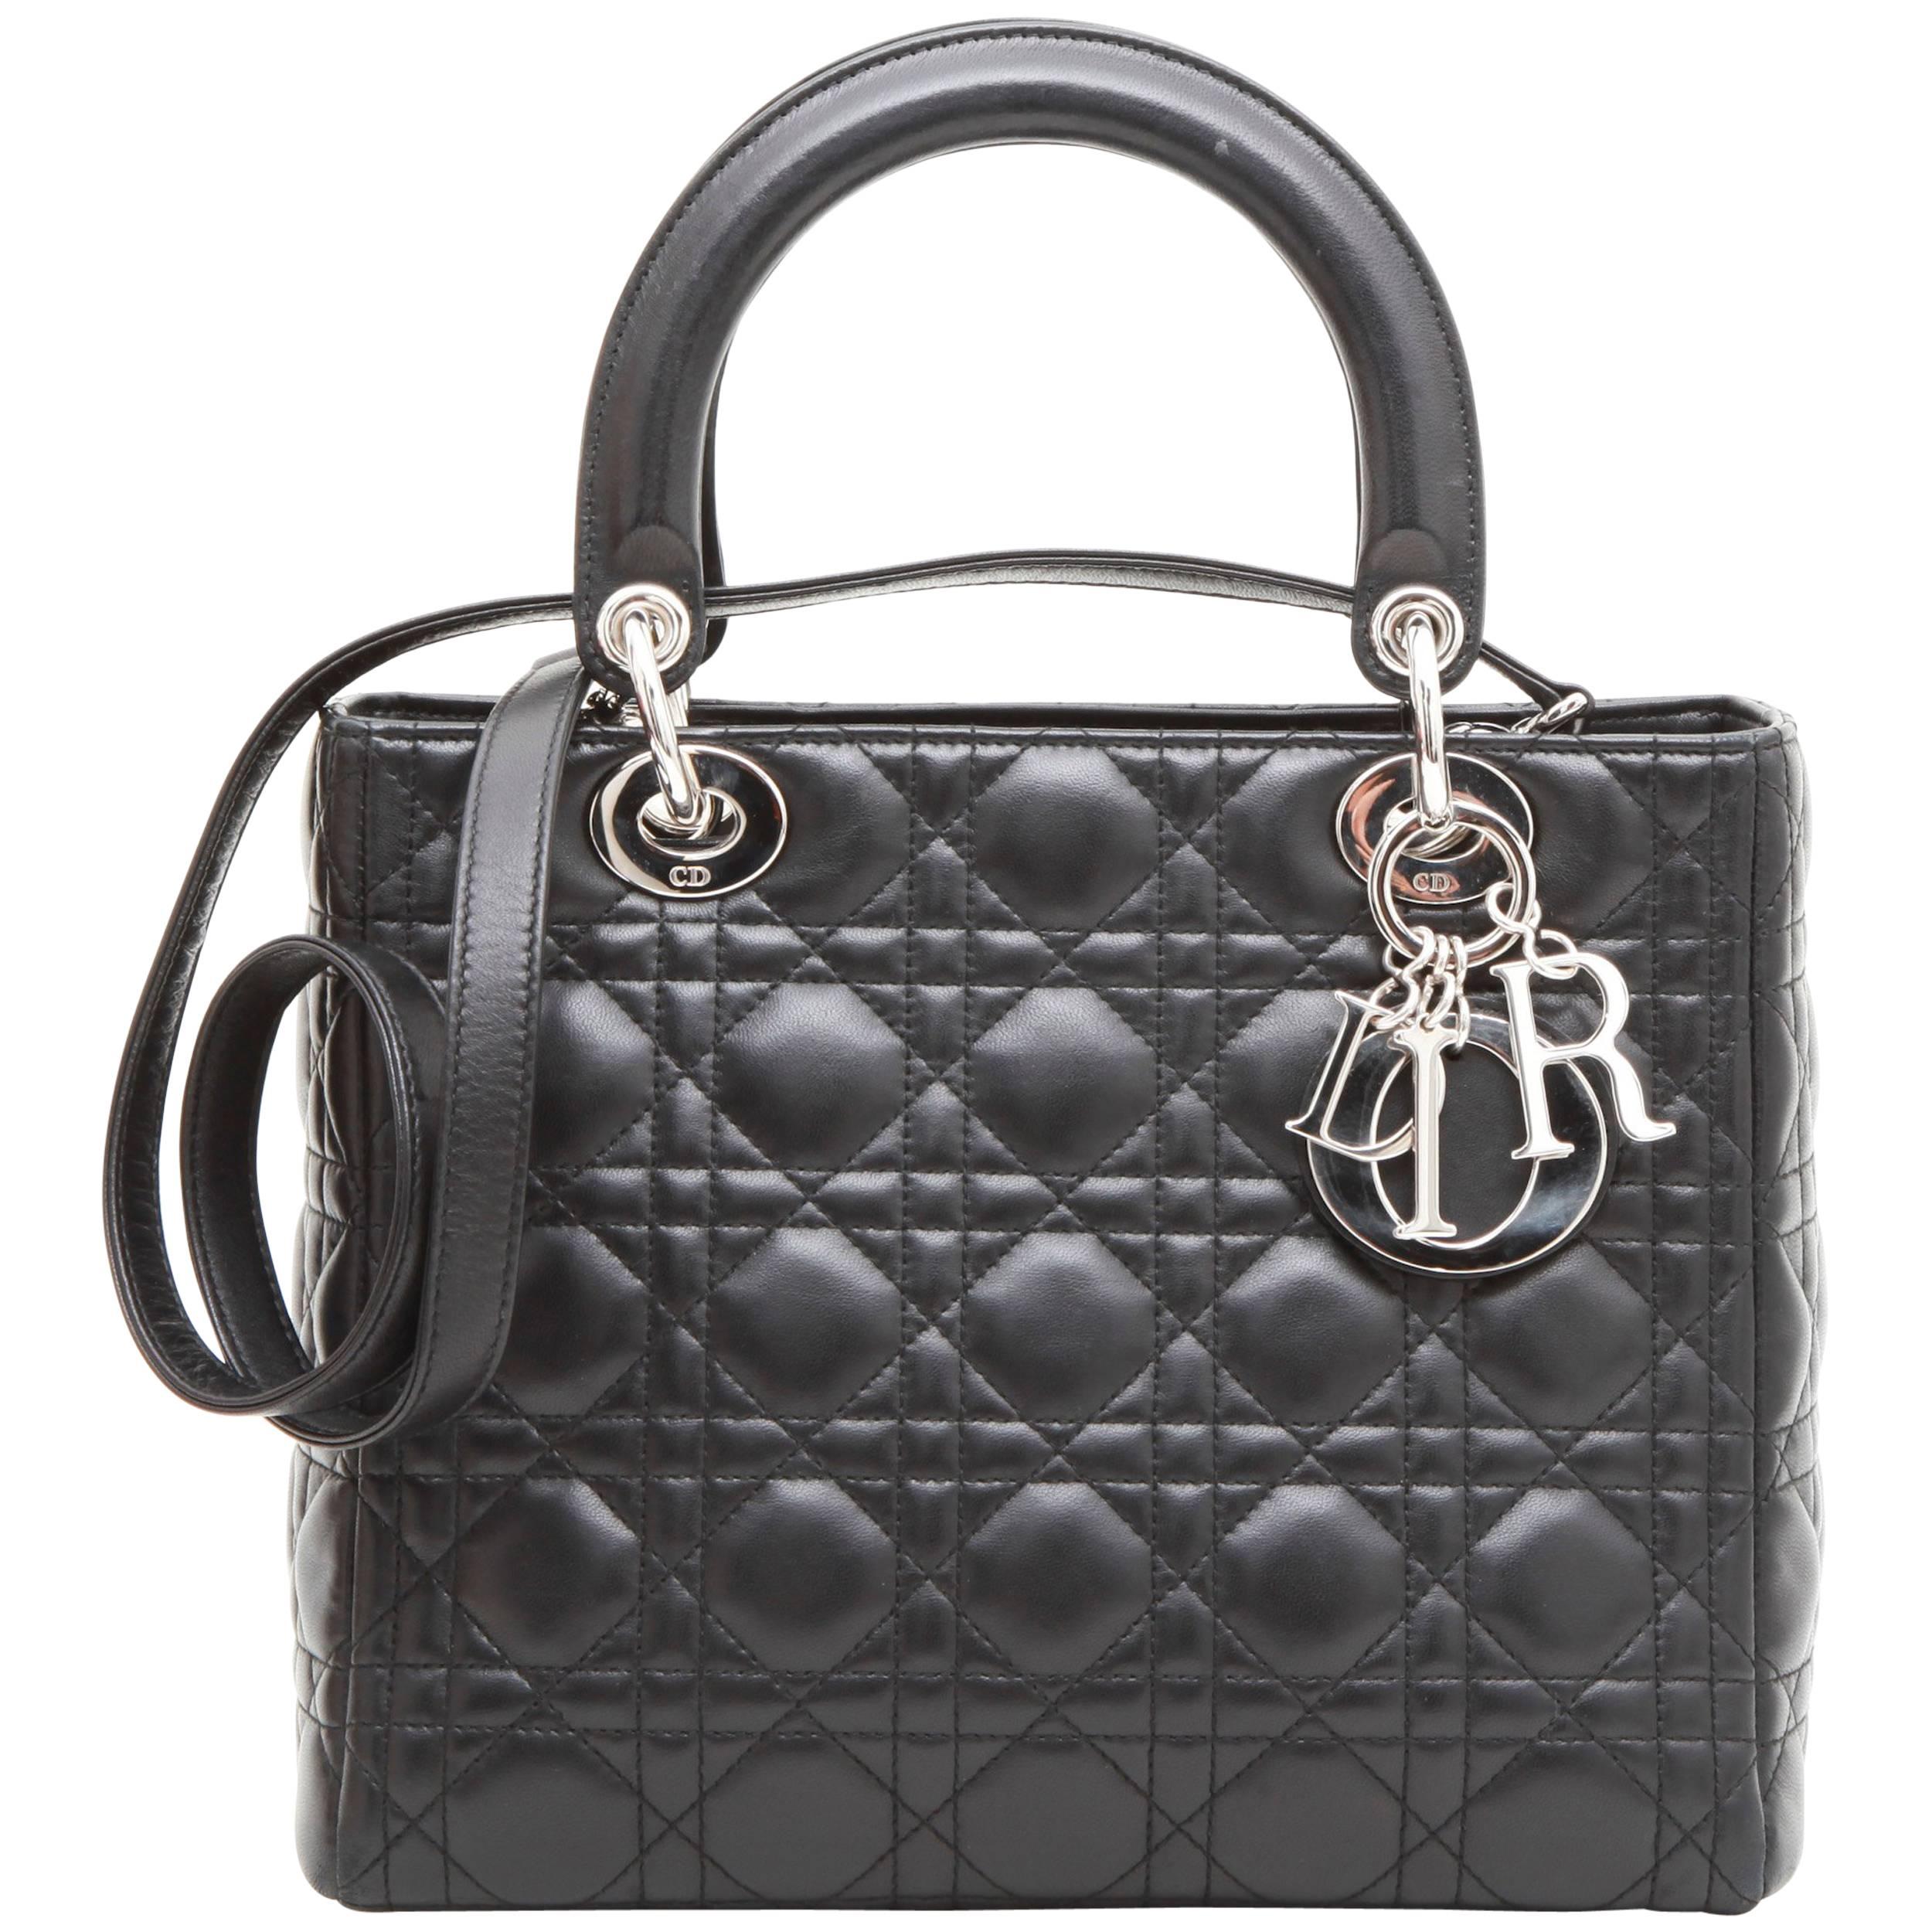 CHRISTIAN DIOR 'Lady Dior' Bag in Black Quilted Leather